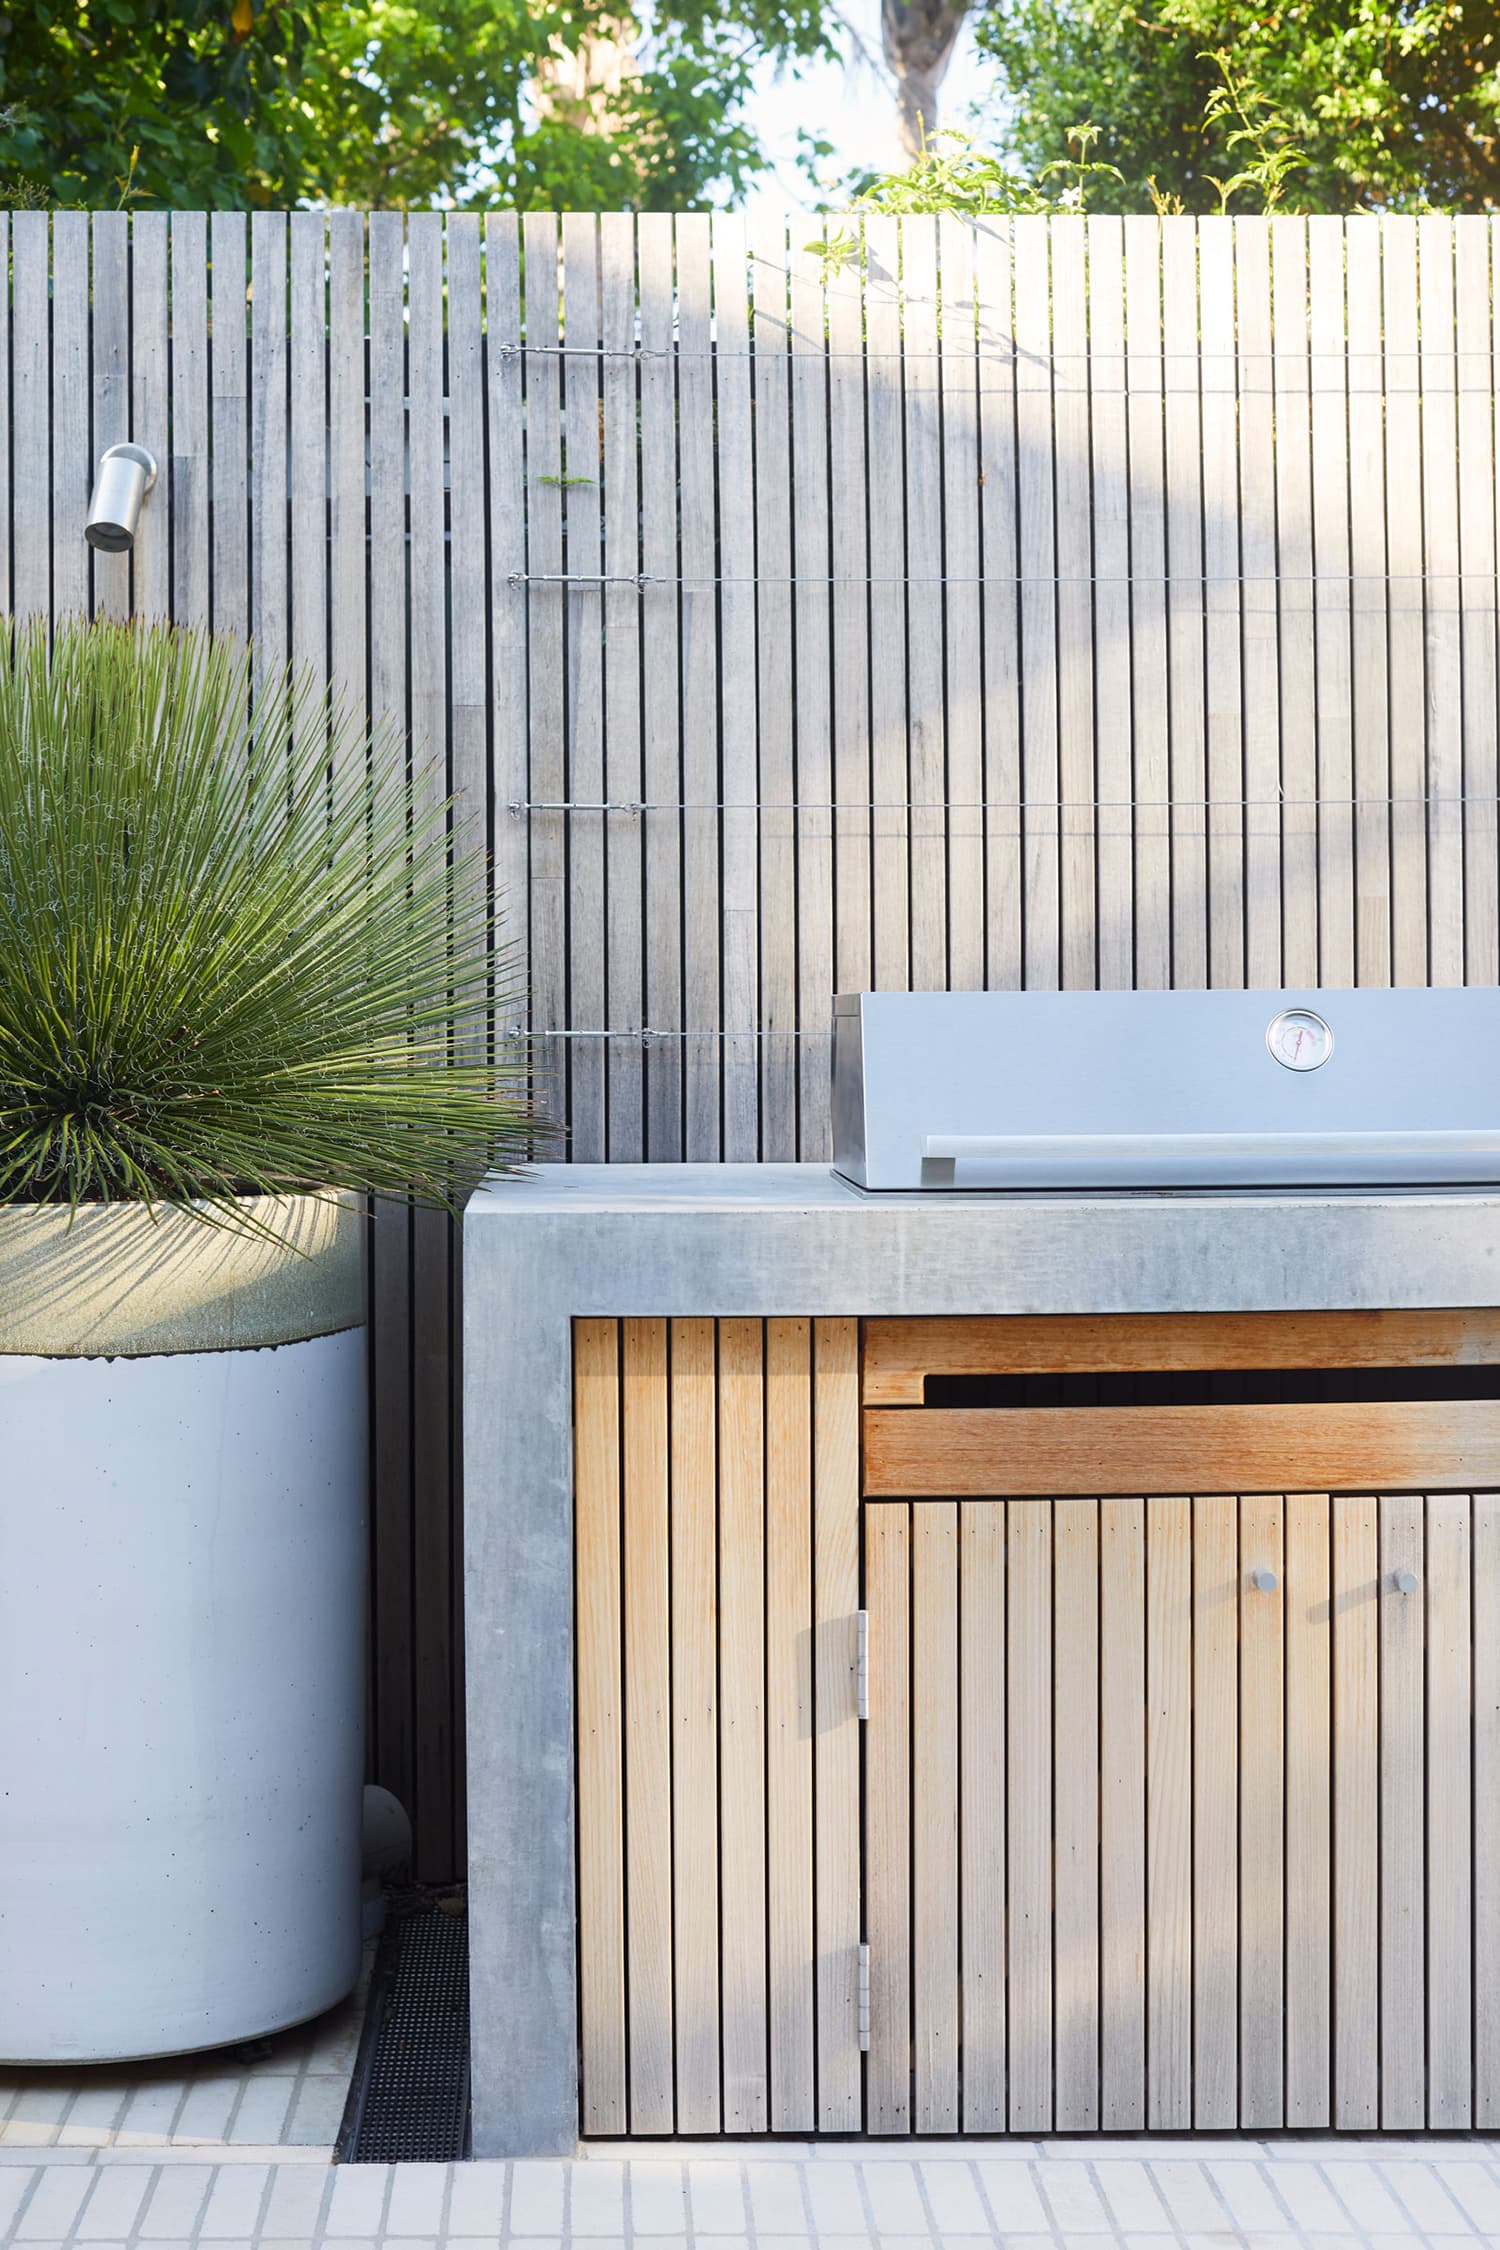 How Do You Build A Perfect Outdoor Kitchen? | urdesignmag